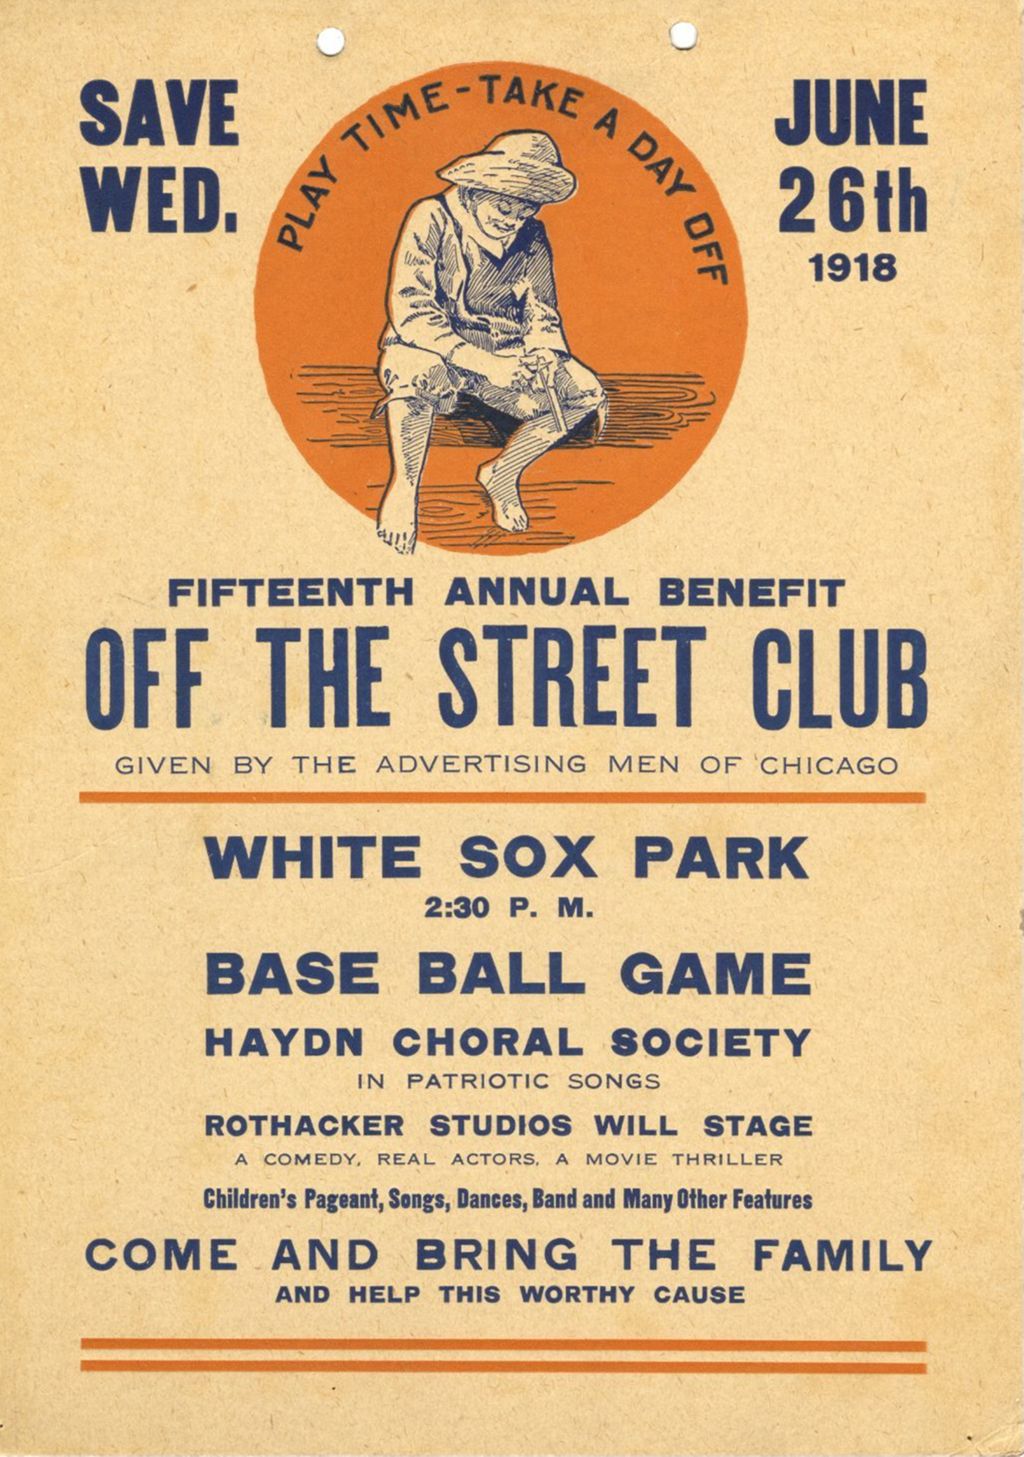 Off-The-Street Club annual benefit flyer